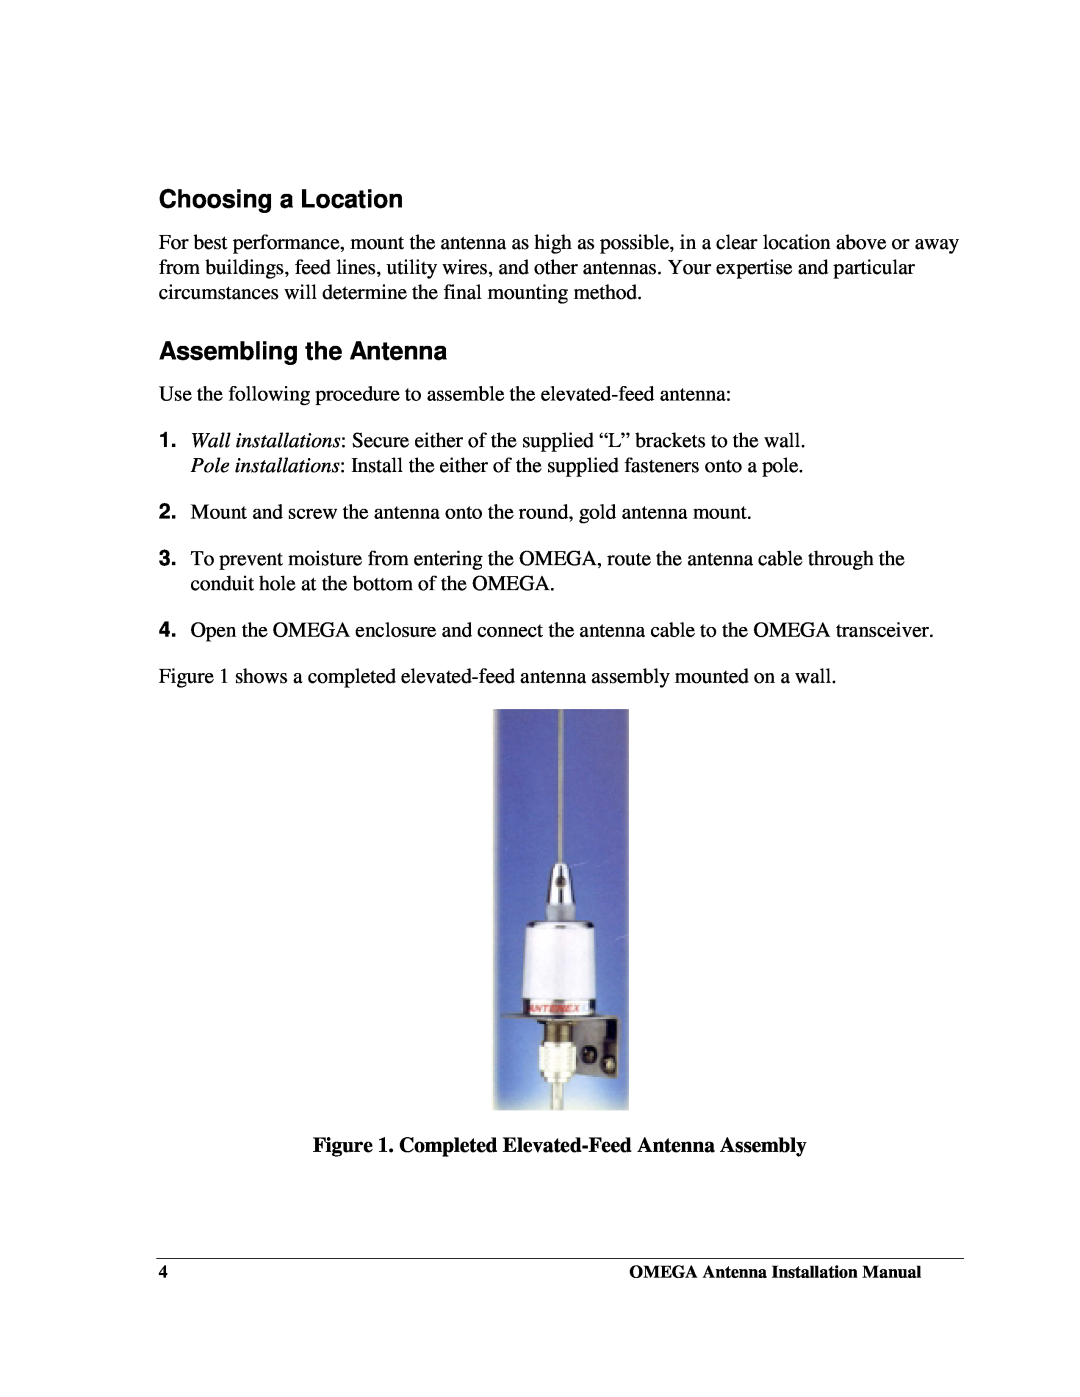 Telenetics Communications and Interface Cabinet Antenna installation manual Choosing a Location, Assembling the Antenna 